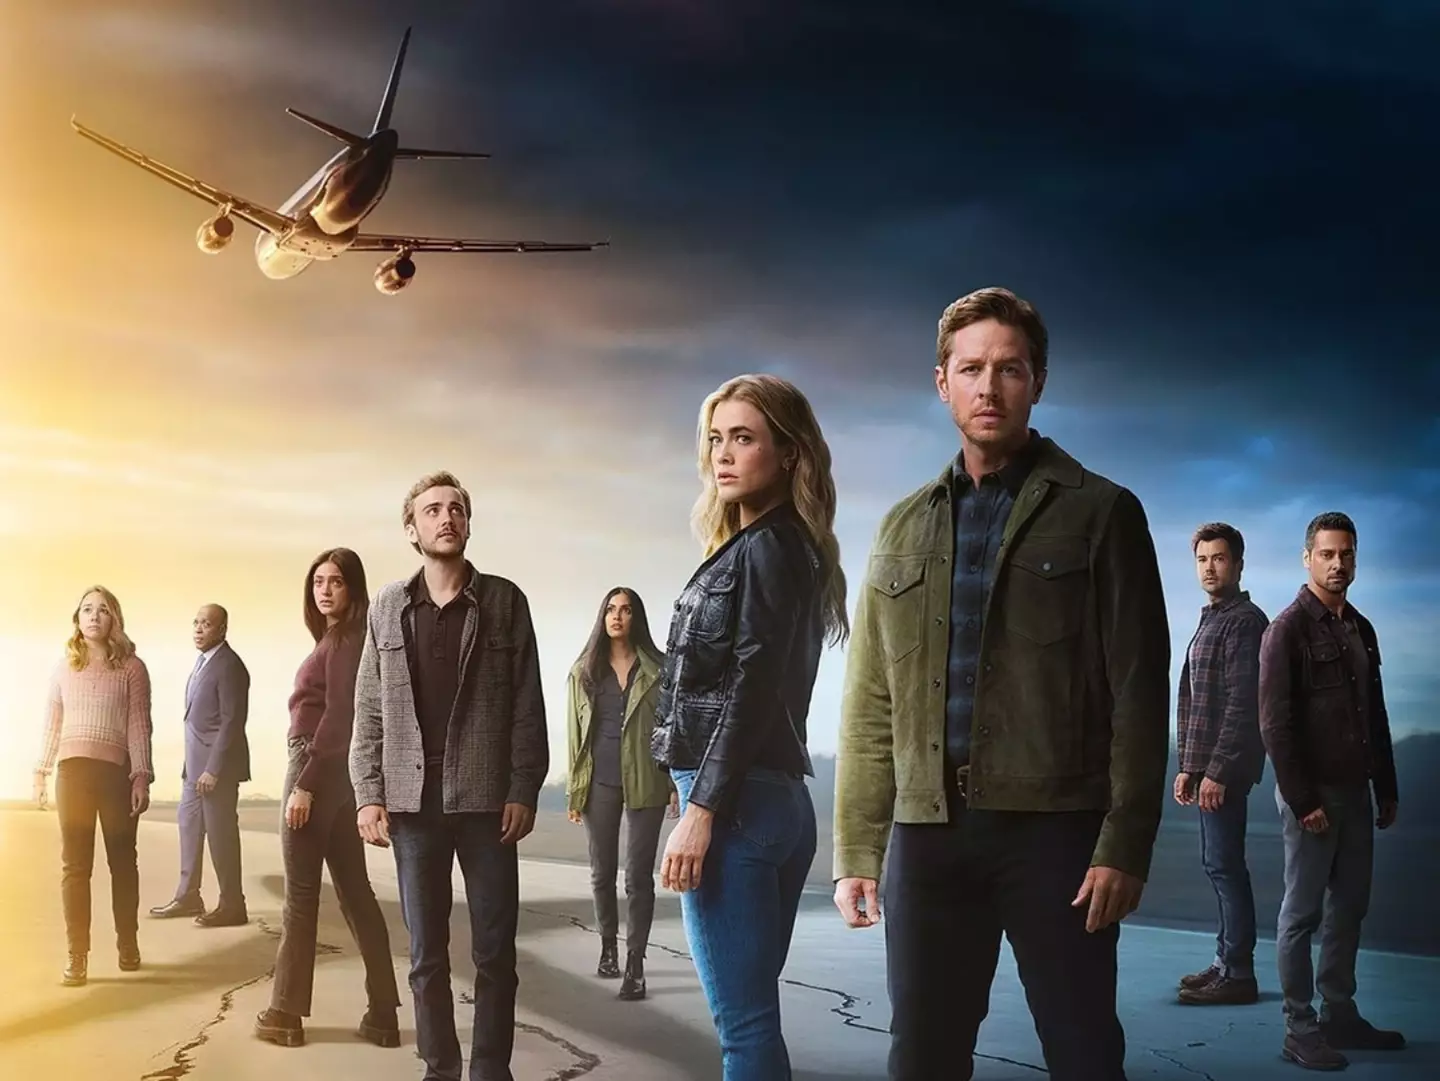 Manifest season four is streaming on Netflix right now.